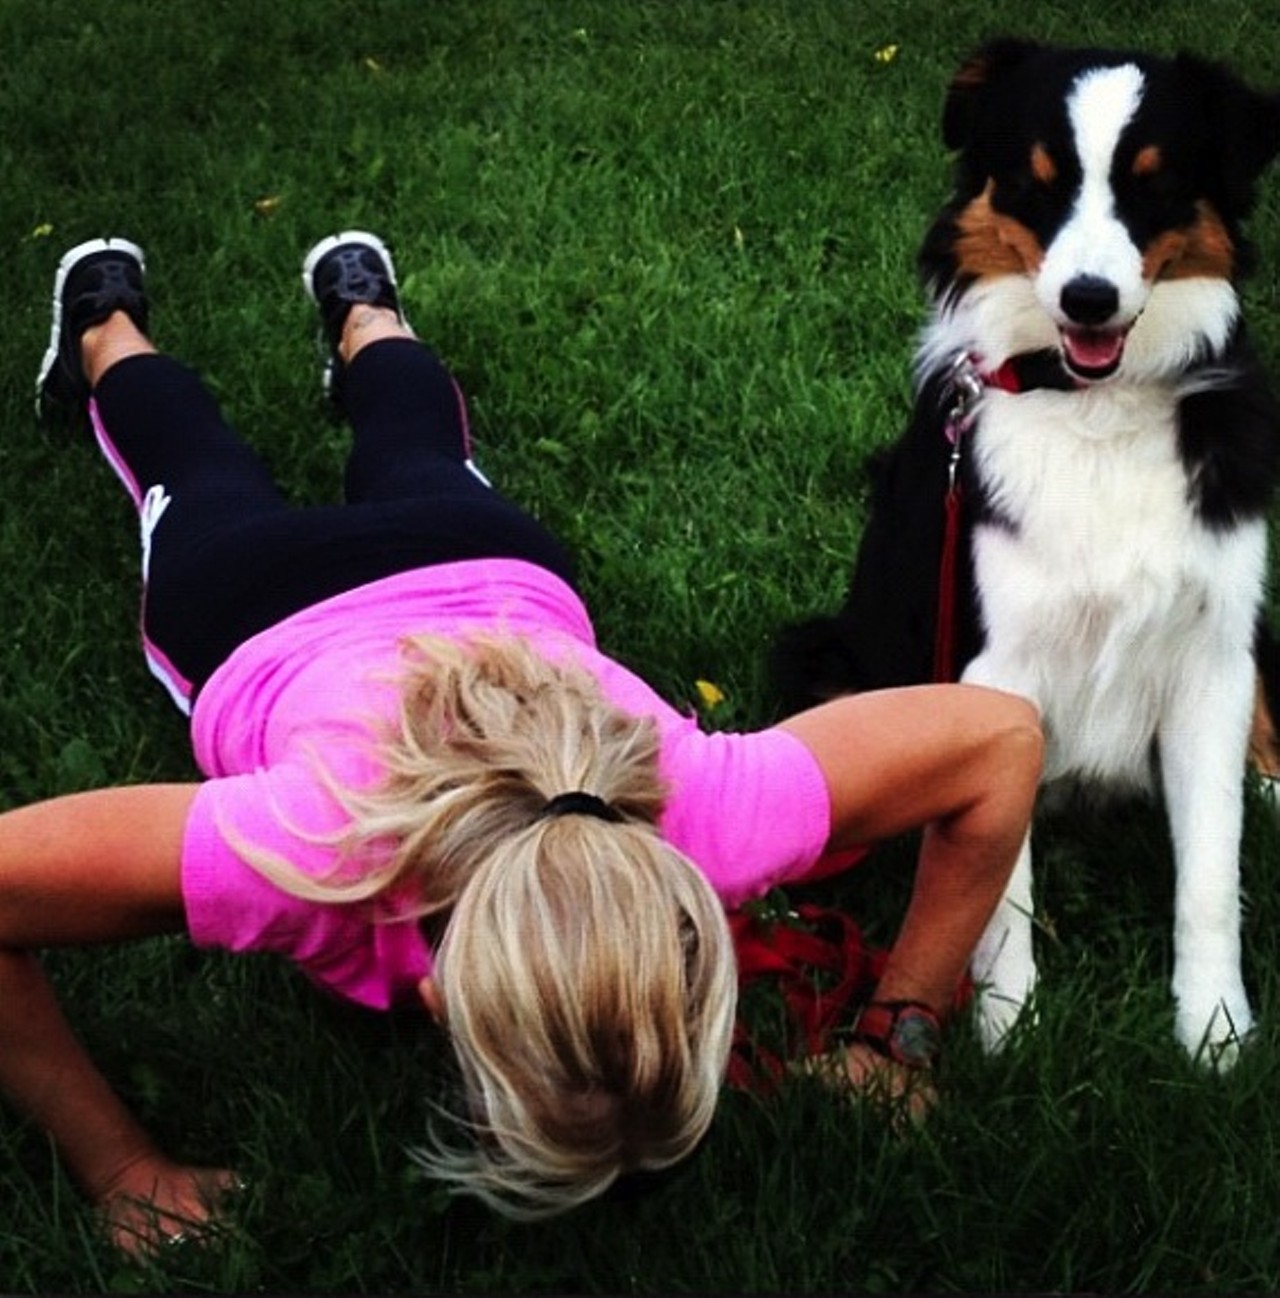 If you and your dog both have a habit of frequent snacking, counteract it and kick both of your asses into shape at Thank Dog! Bootcamp. Visit thankdogneo.com for more info.